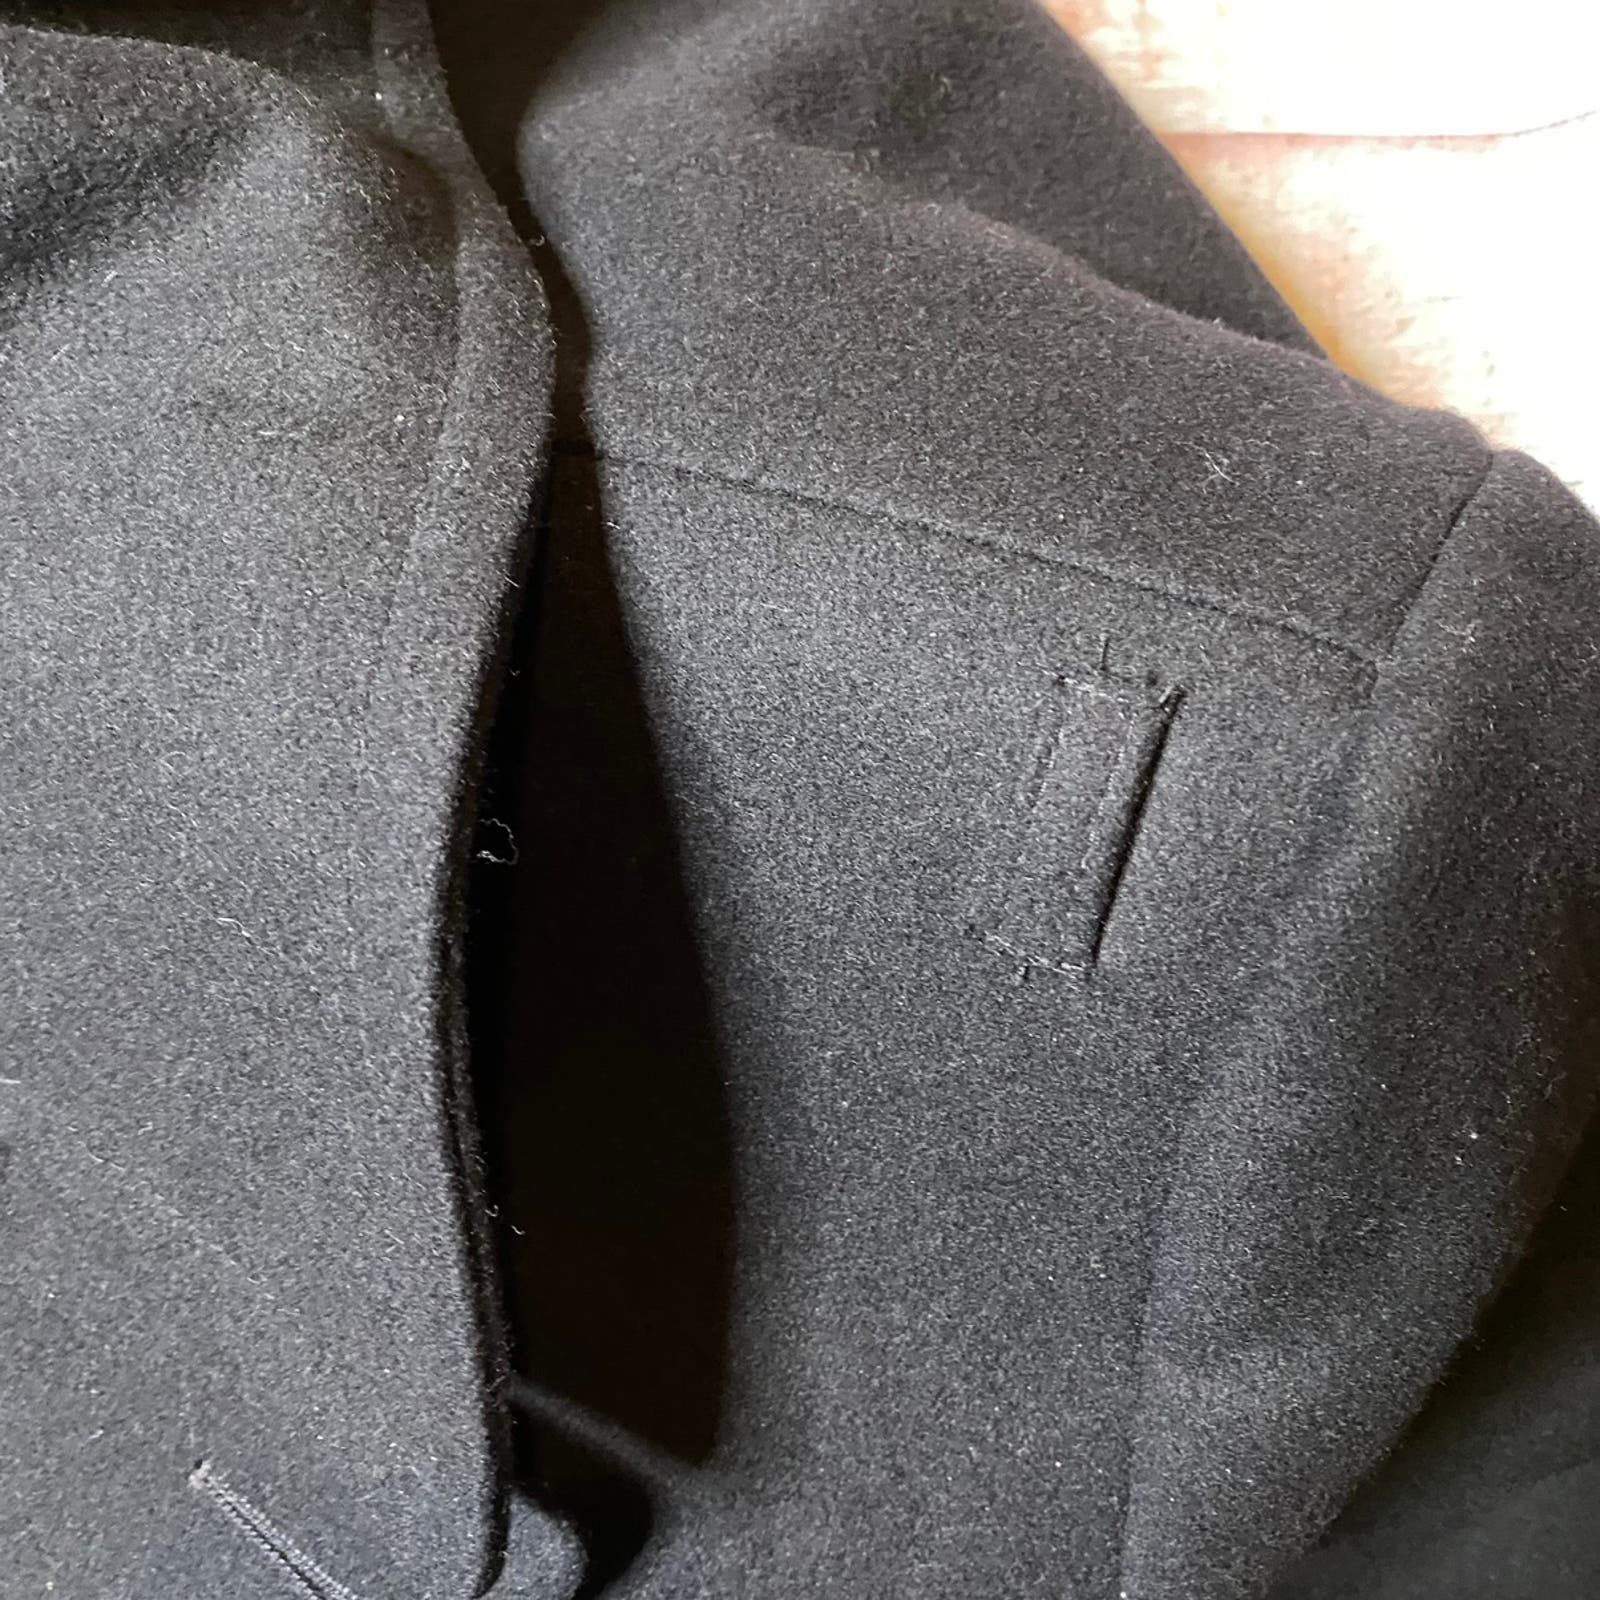 Other Neptune Garment Co Black Wool Military Pea Coat Size Small Size US S / EU 44-46 / 1 - 9 Thumbnail